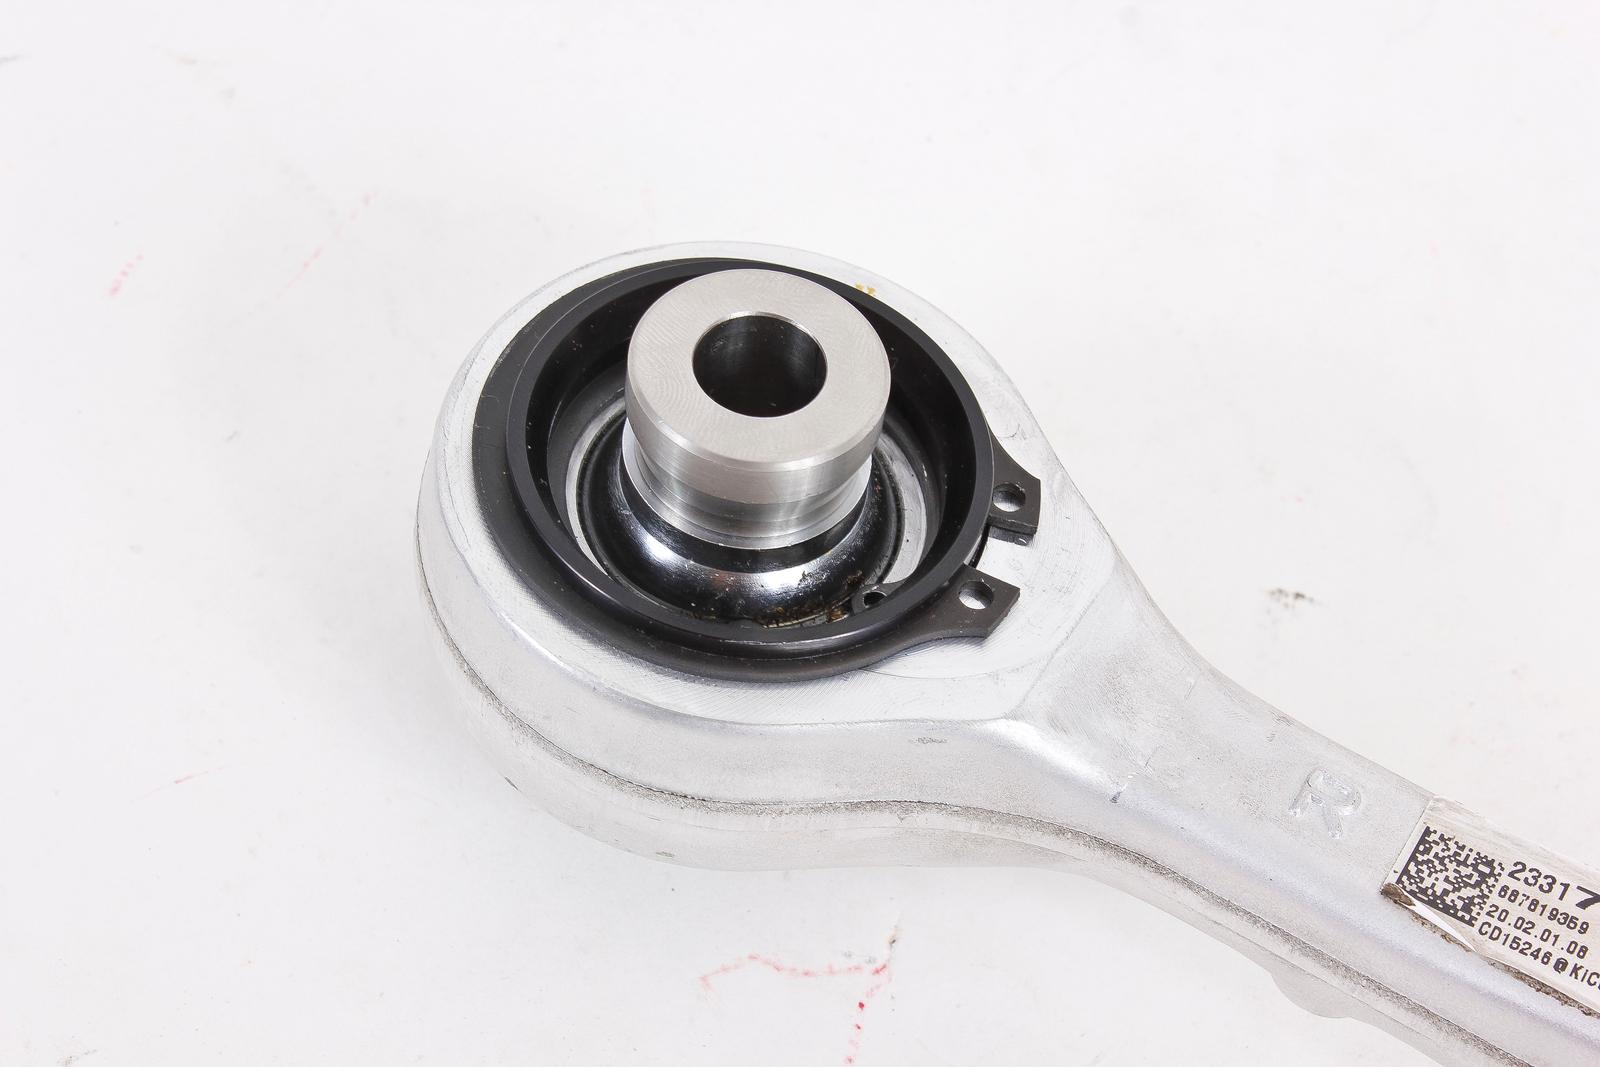 BMR Suspension - Spherical Bearing, Lower Control Arm, Front - The Speed Depot